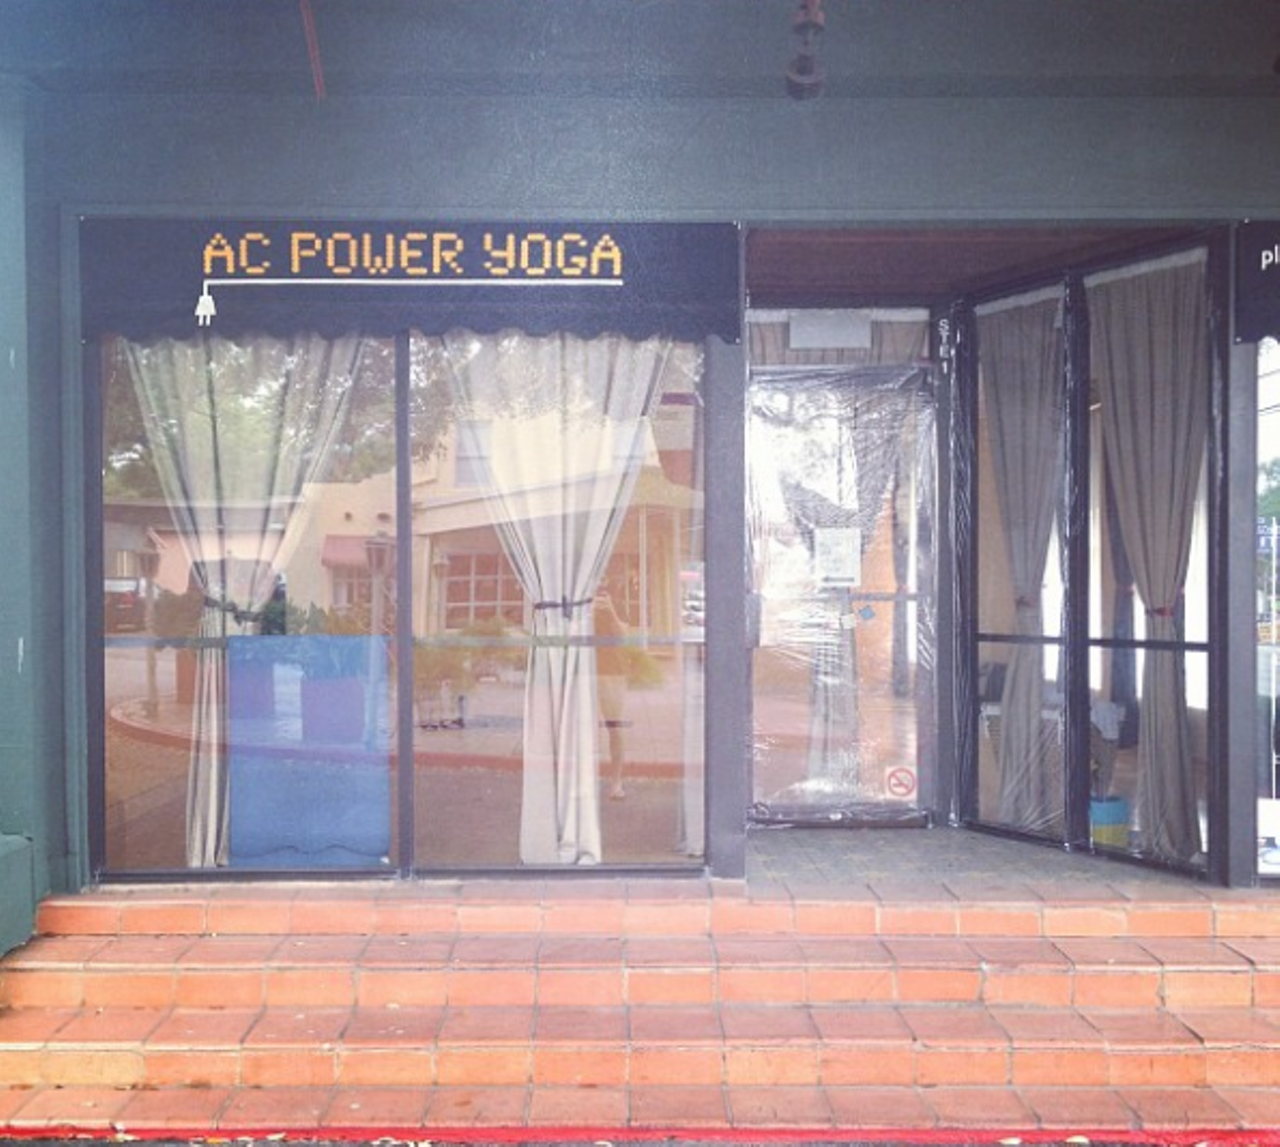 AC Power Yoga
3609 Broadway St, (210) 296-7718
You can check out AC Power Yoga's class schedule here for power yoga, Sridaiva and Yin Yoga classes.
Photo via Instagram/bjsr